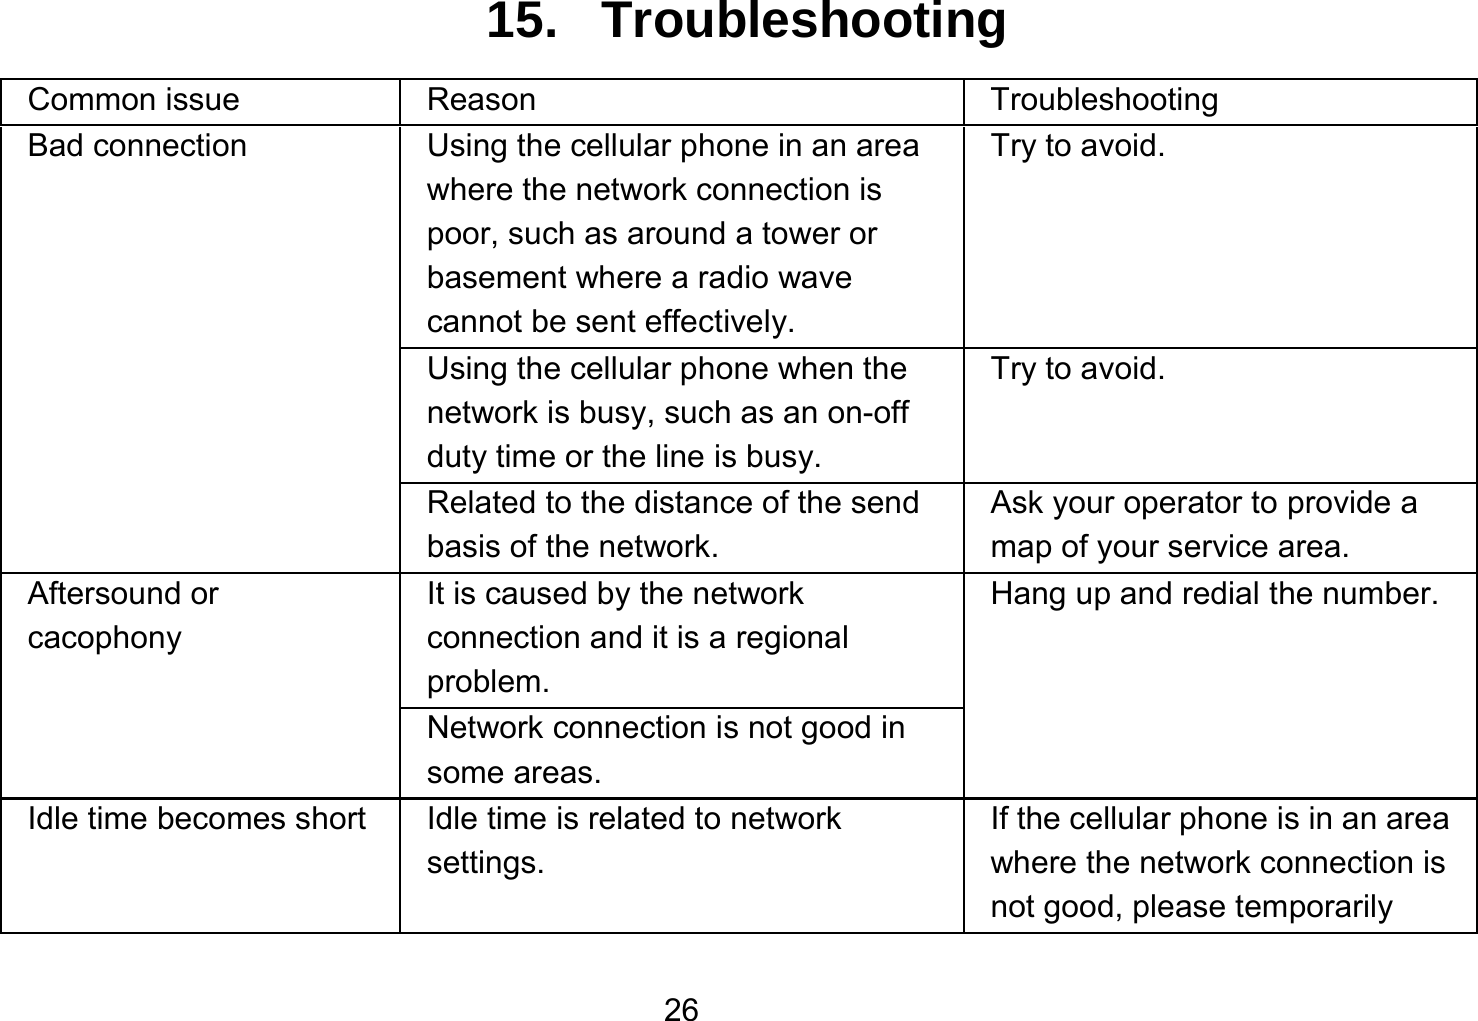   2615.   Troubleshooting Common issue  Reason  Troubleshooting Bad connection  Using the cellular phone in an area where the network connection is poor, such as around a tower or basement where a radio wave cannot be sent effectively.   Try to avoid. Using the cellular phone when the network is busy, such as an on-off duty time or the line is busy. Try to avoid. Related to the distance of the send basis of the network. Ask your operator to provide a map of your service area. Aftersound or cacophony It is caused by the network connection and it is a regional problem. Hang up and redial the number. Network connection is not good in some areas. Idle time becomes short  Idle time is related to network settings. If the cellular phone is in an area where the network connection is not good, please temporarily 